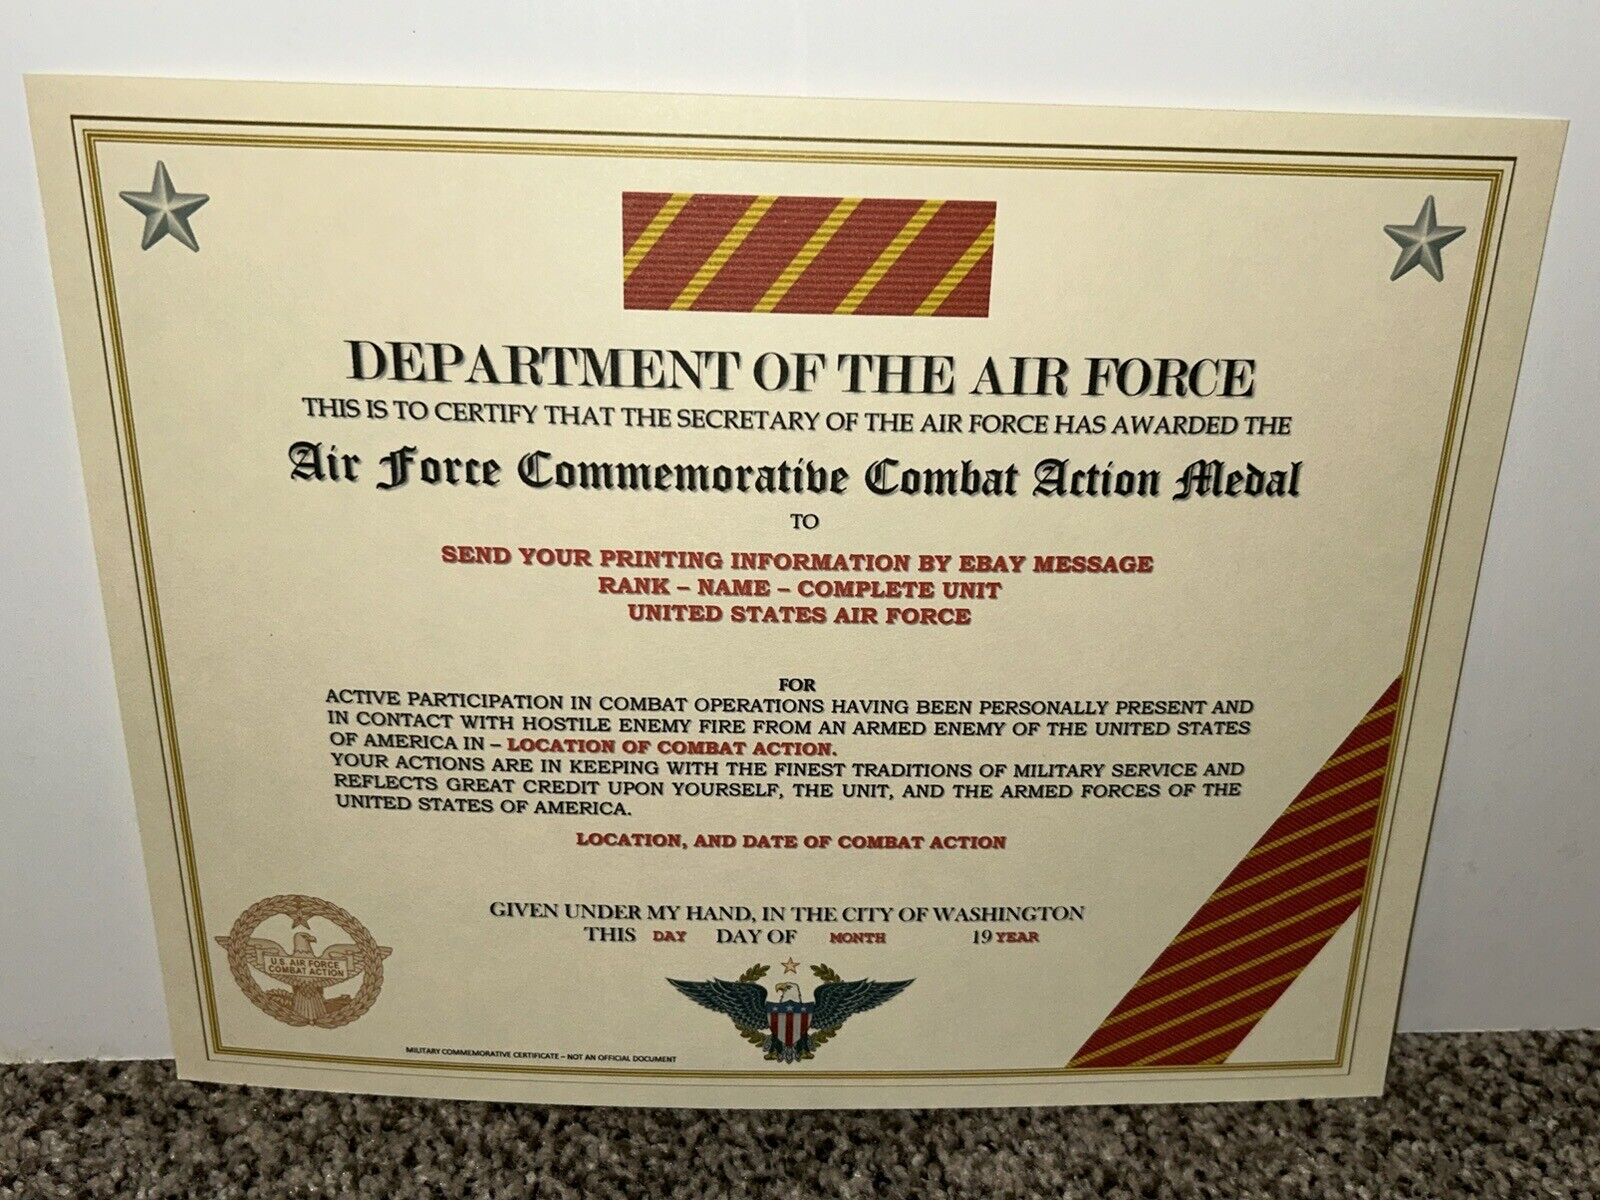 U.S. AIR FORCE COMBAT ACTION COMMEMORATIVE MEDAL CERTIFICATE ~ W/PRINTING T-1